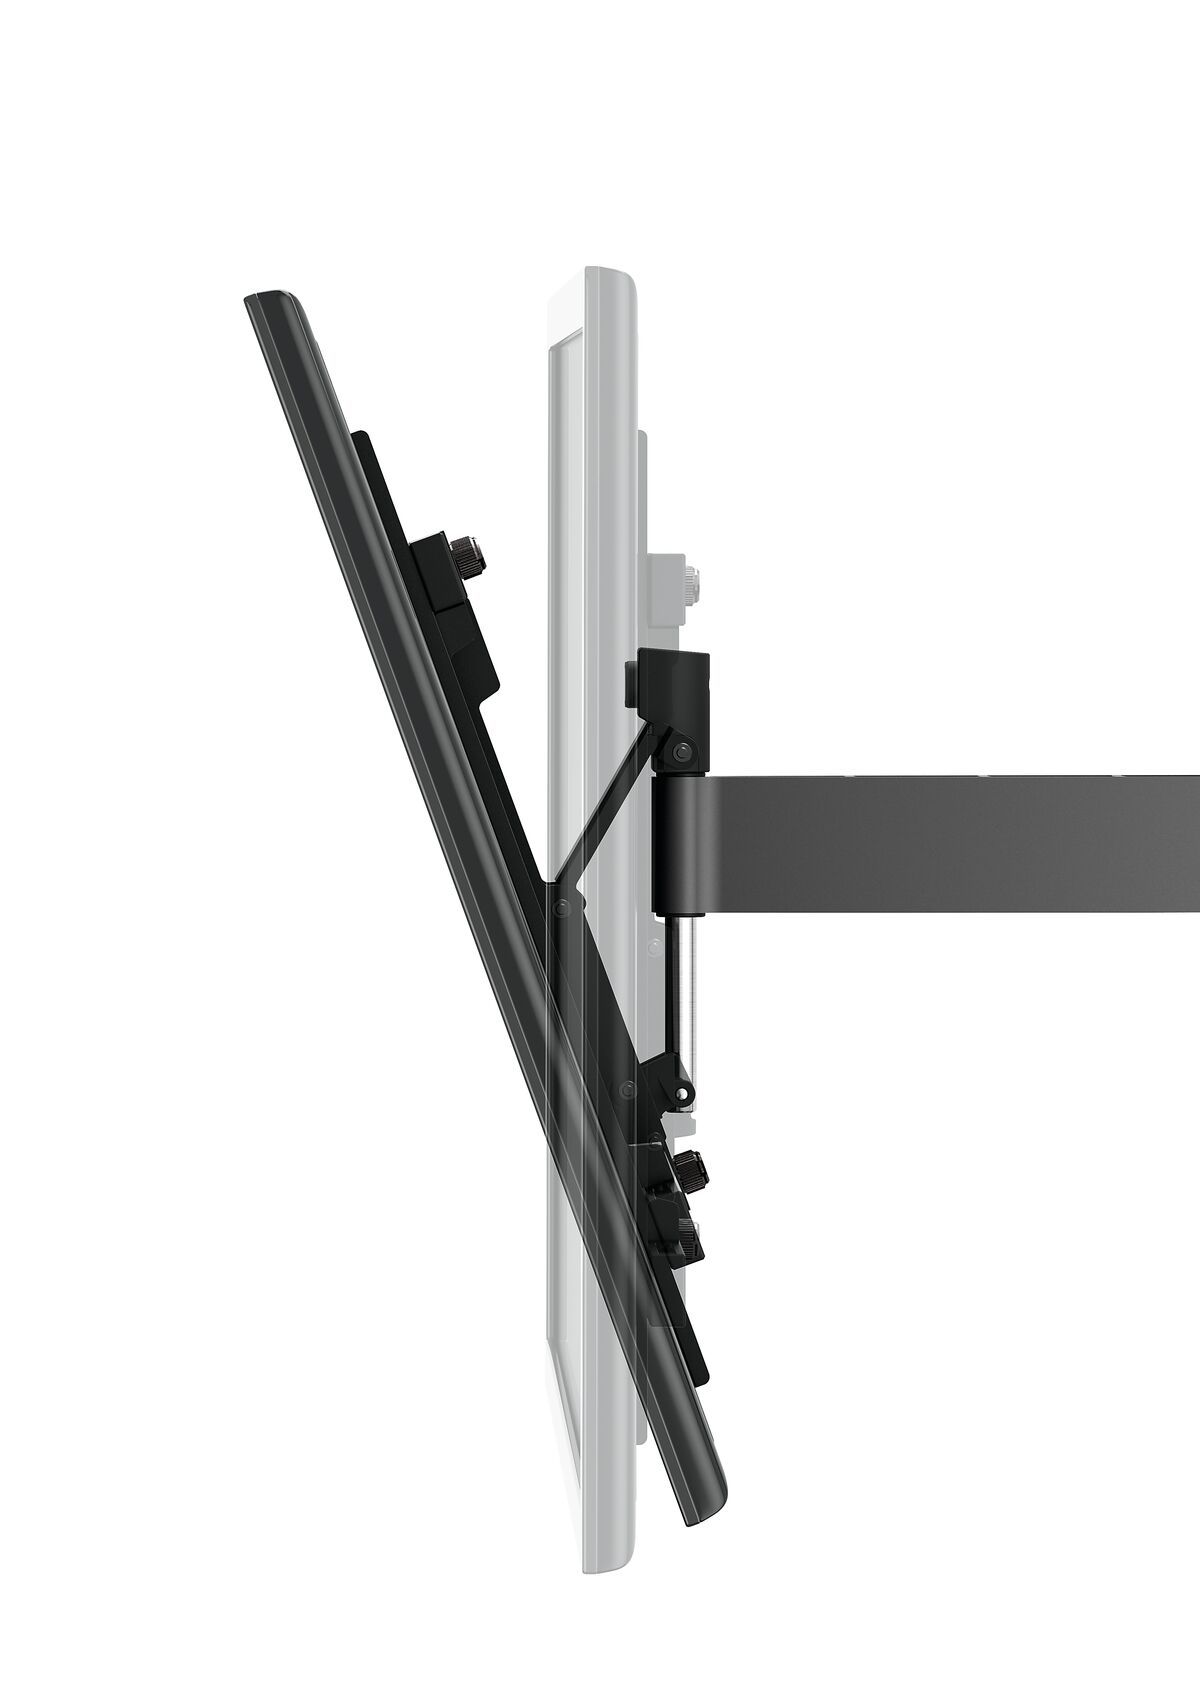 Vogel's WALL 2225 Full-Motion TV Wall Mount (white) - Suitable for 32 up to 55 inch TVs - Motion (up to 120°) - Tilt up to 20° - Detail